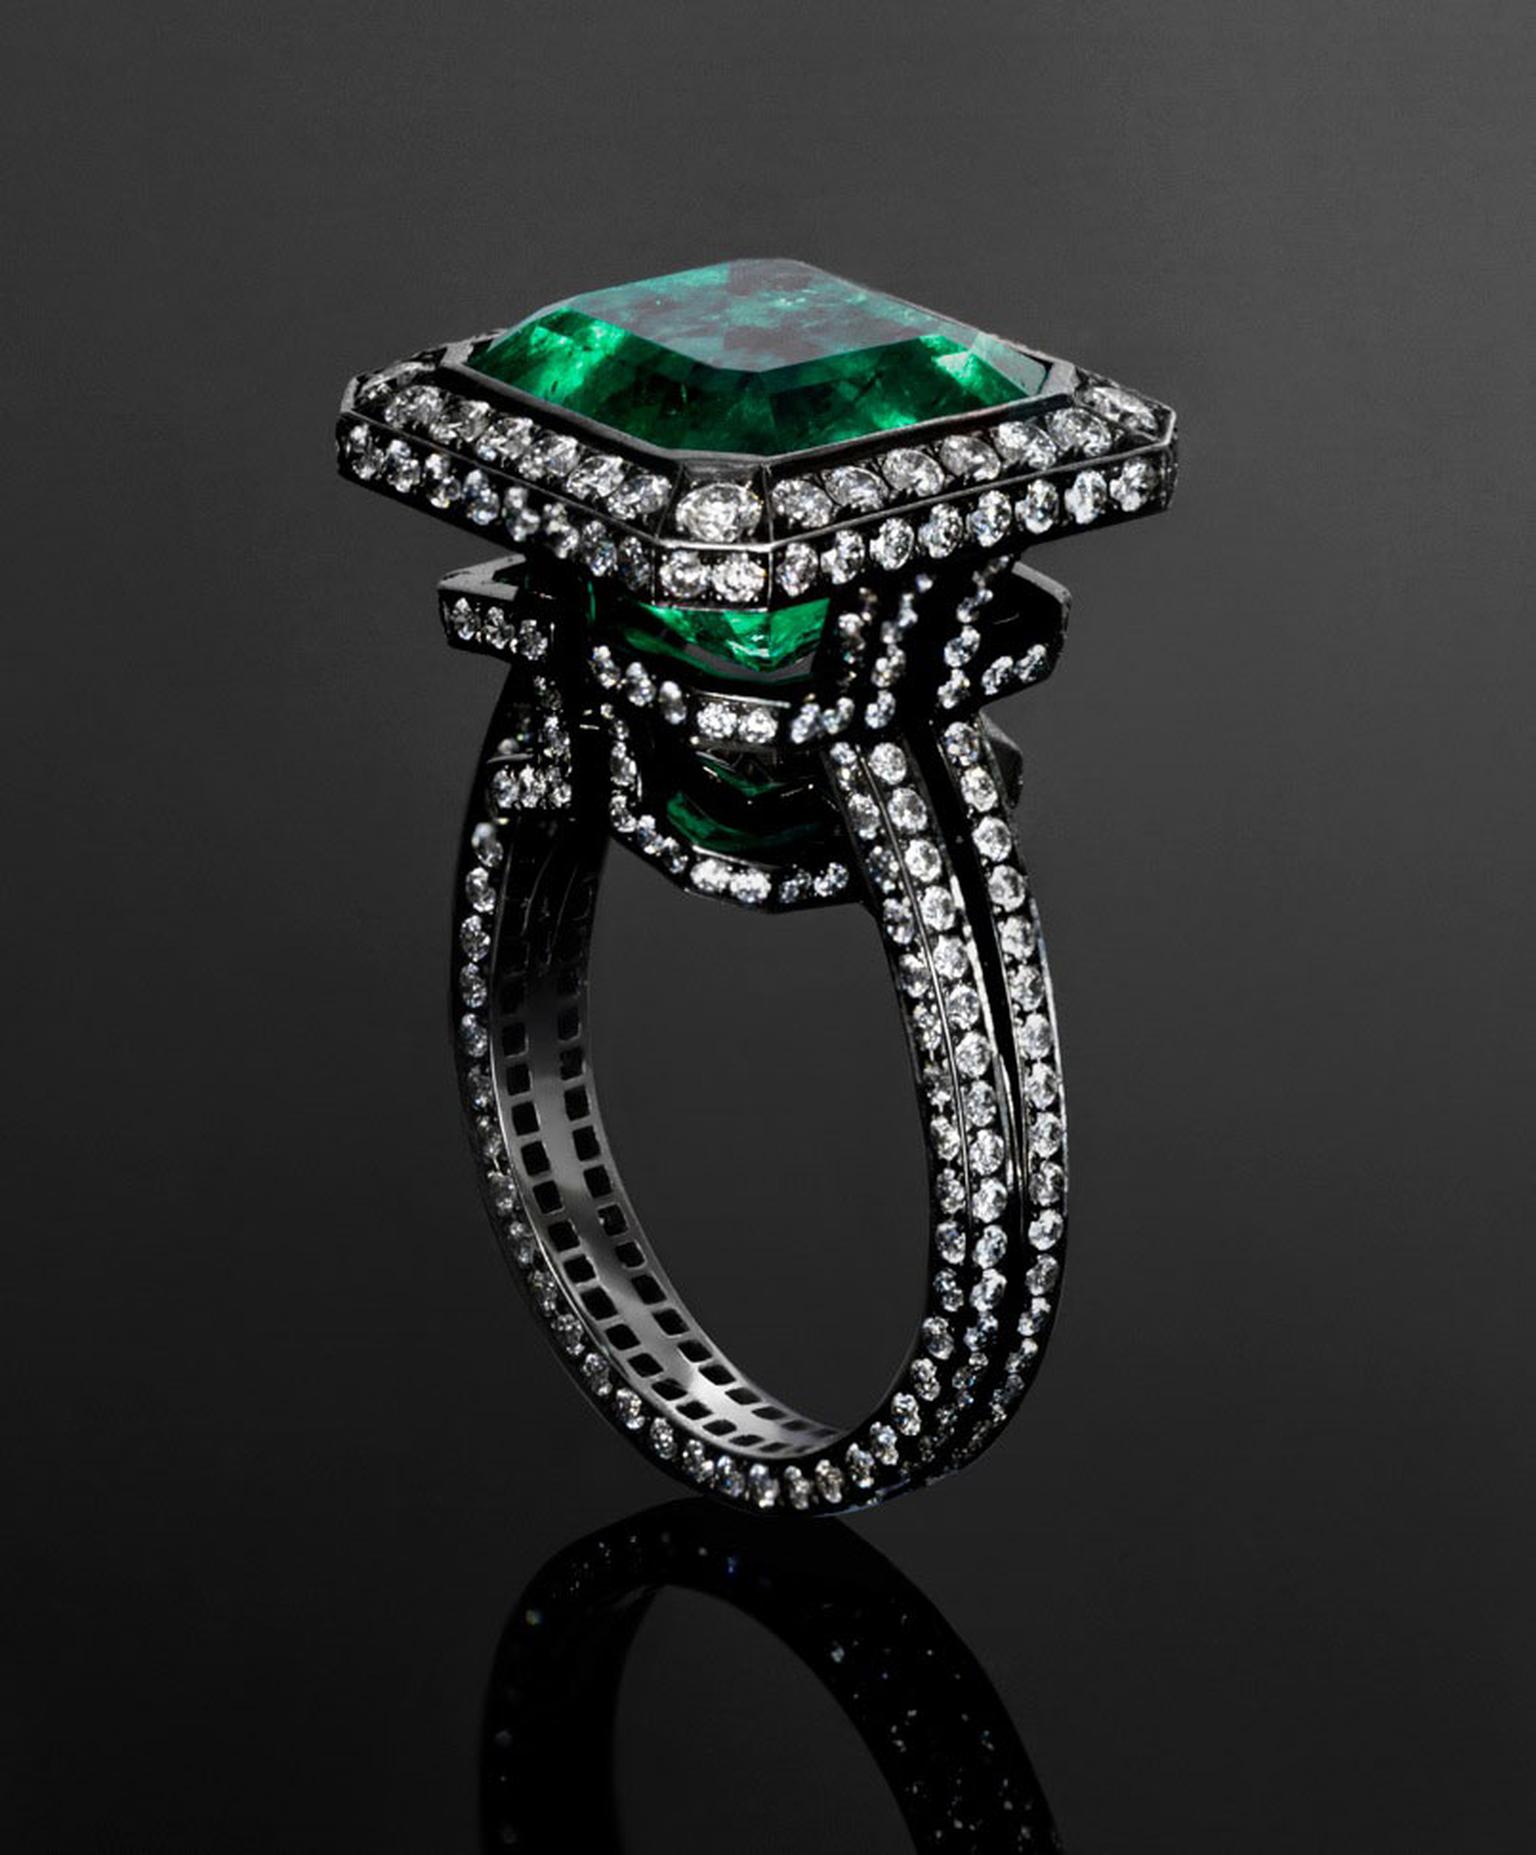 Jack du Rose Emerald Labyrinth ring set with a 9.196ct emerald in blackened white gold (£56,000).